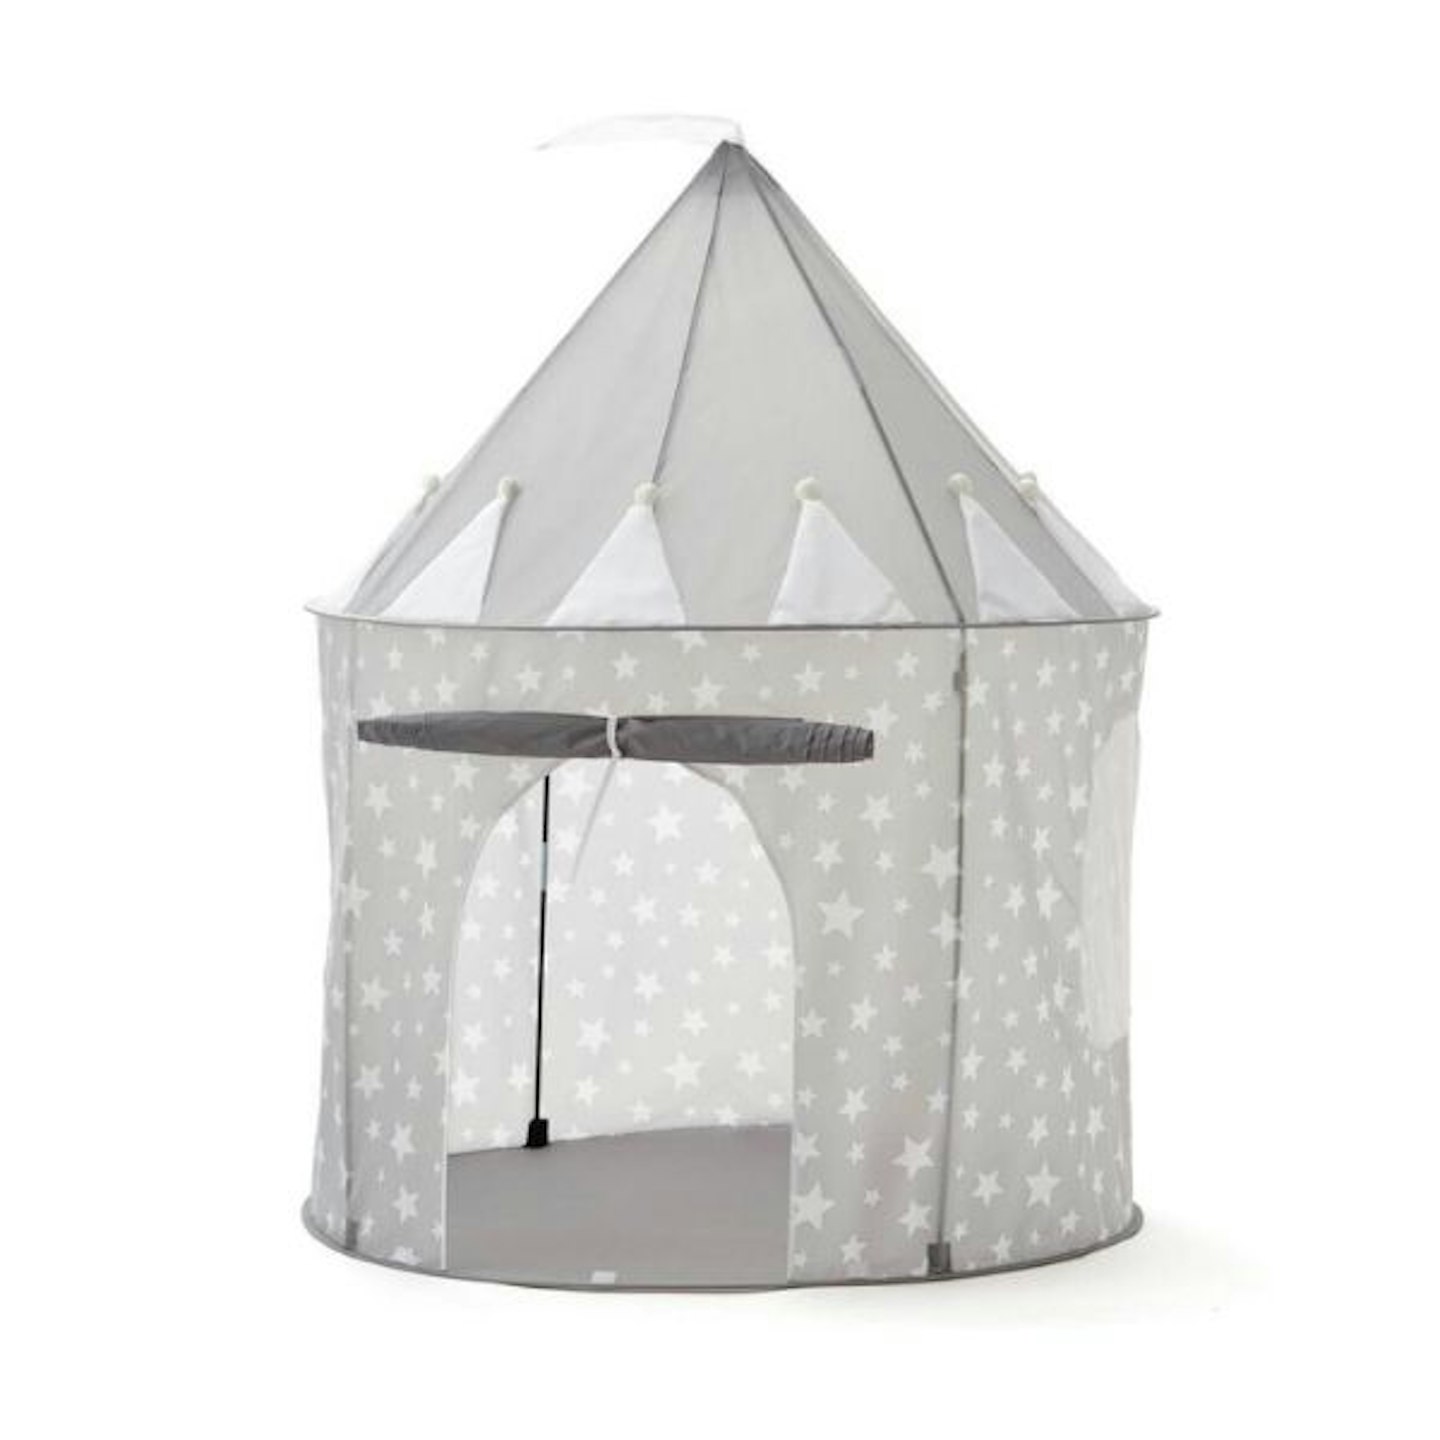 Kids Concept Play Tent in Star Grey